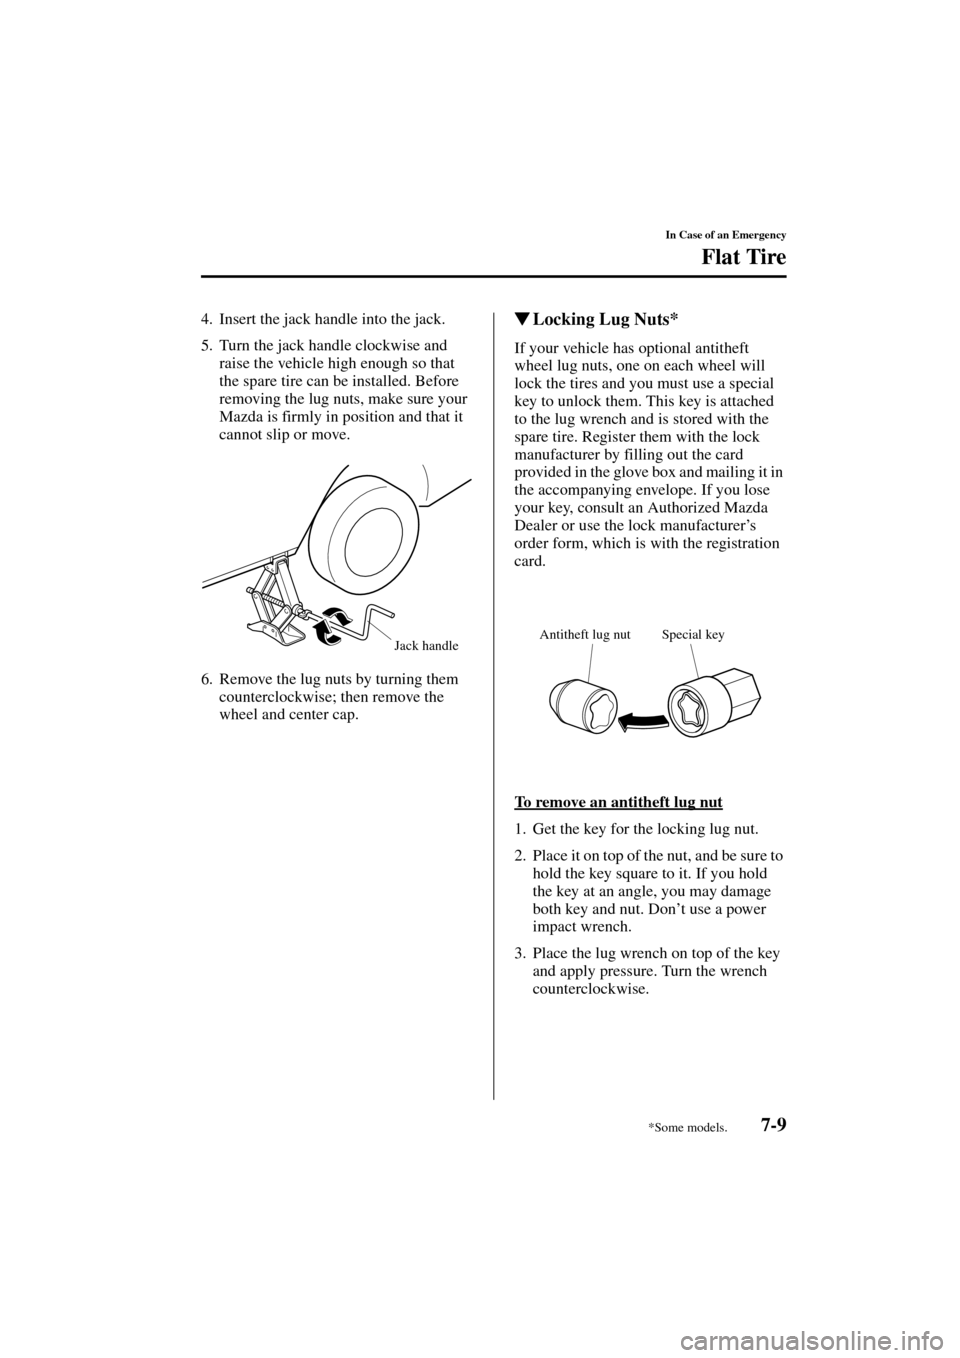 MAZDA MODEL 3 HATCHBACK 2004  Owners Manual (in English) 7-9
In Case of an Emergency
Flat Tire
Form No. 8S18-EA-03I
4. Insert the jack handle into the jack.
5. Turn the jack handle clockwise and 
raise the vehicle high enough so that 
the spare tire can be 